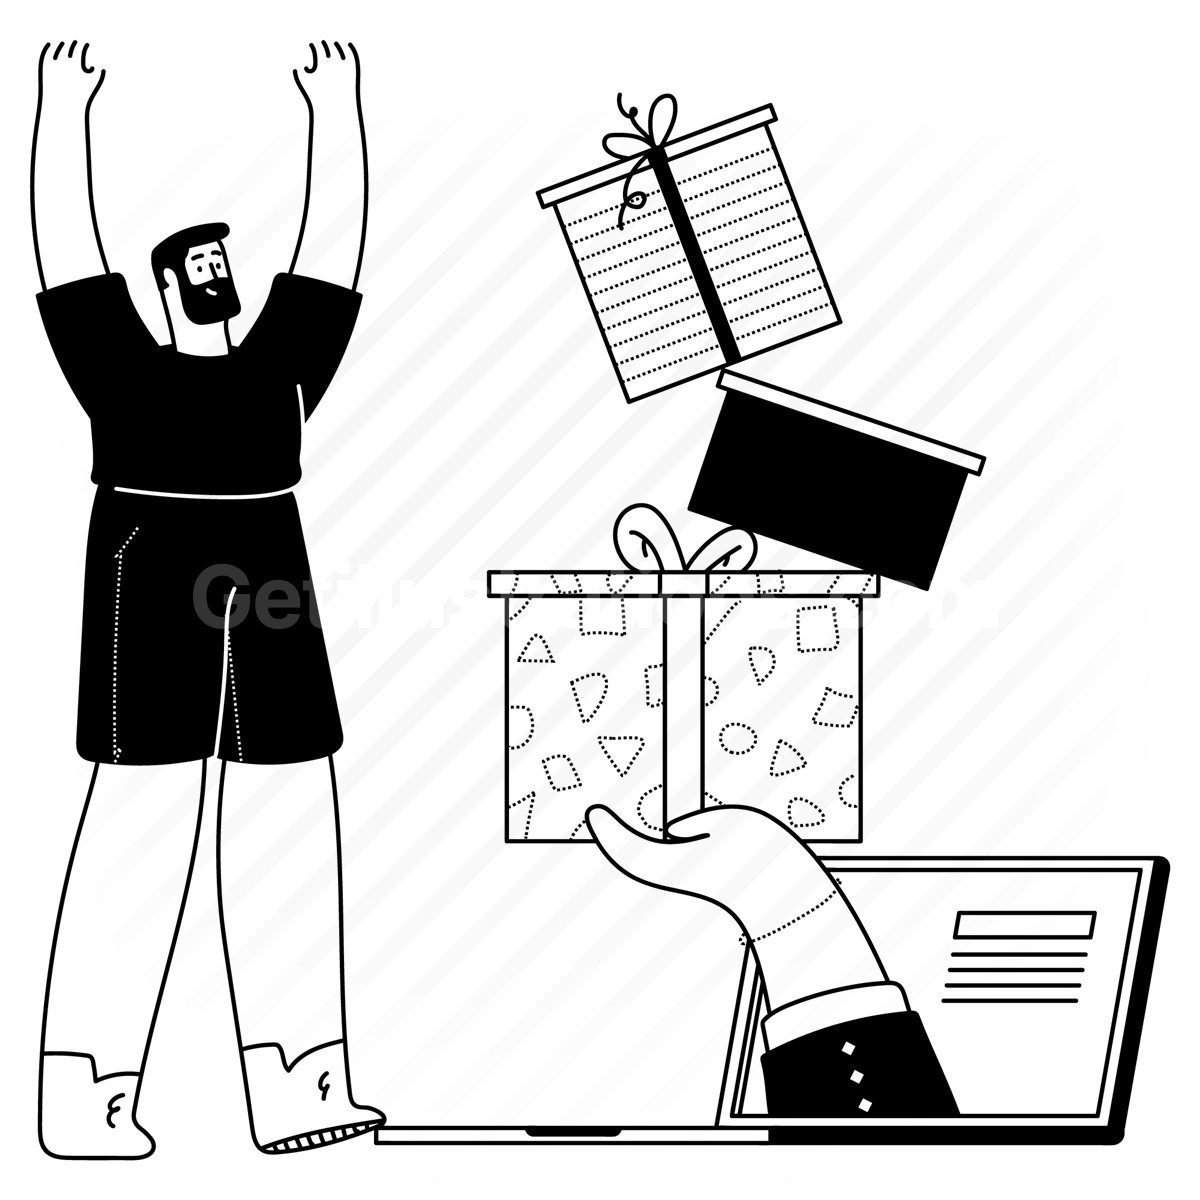 box, gift, present, package, handover, giveaway, laptop